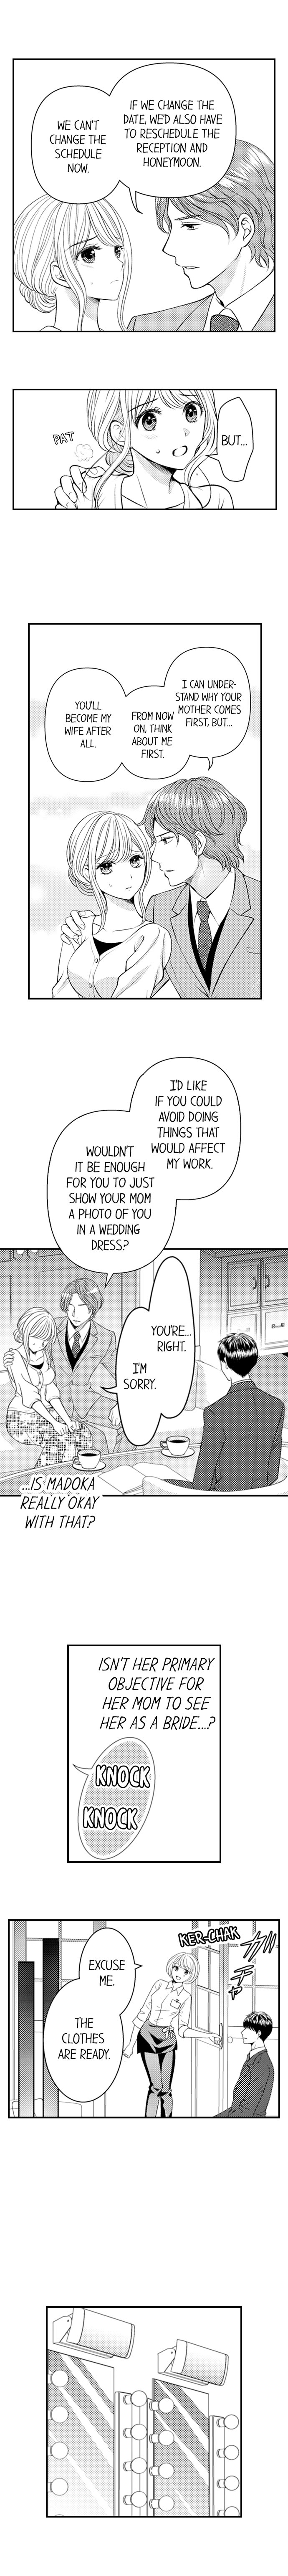 Cheating in a One-Sided Relationship - Chapter 10 Page 4